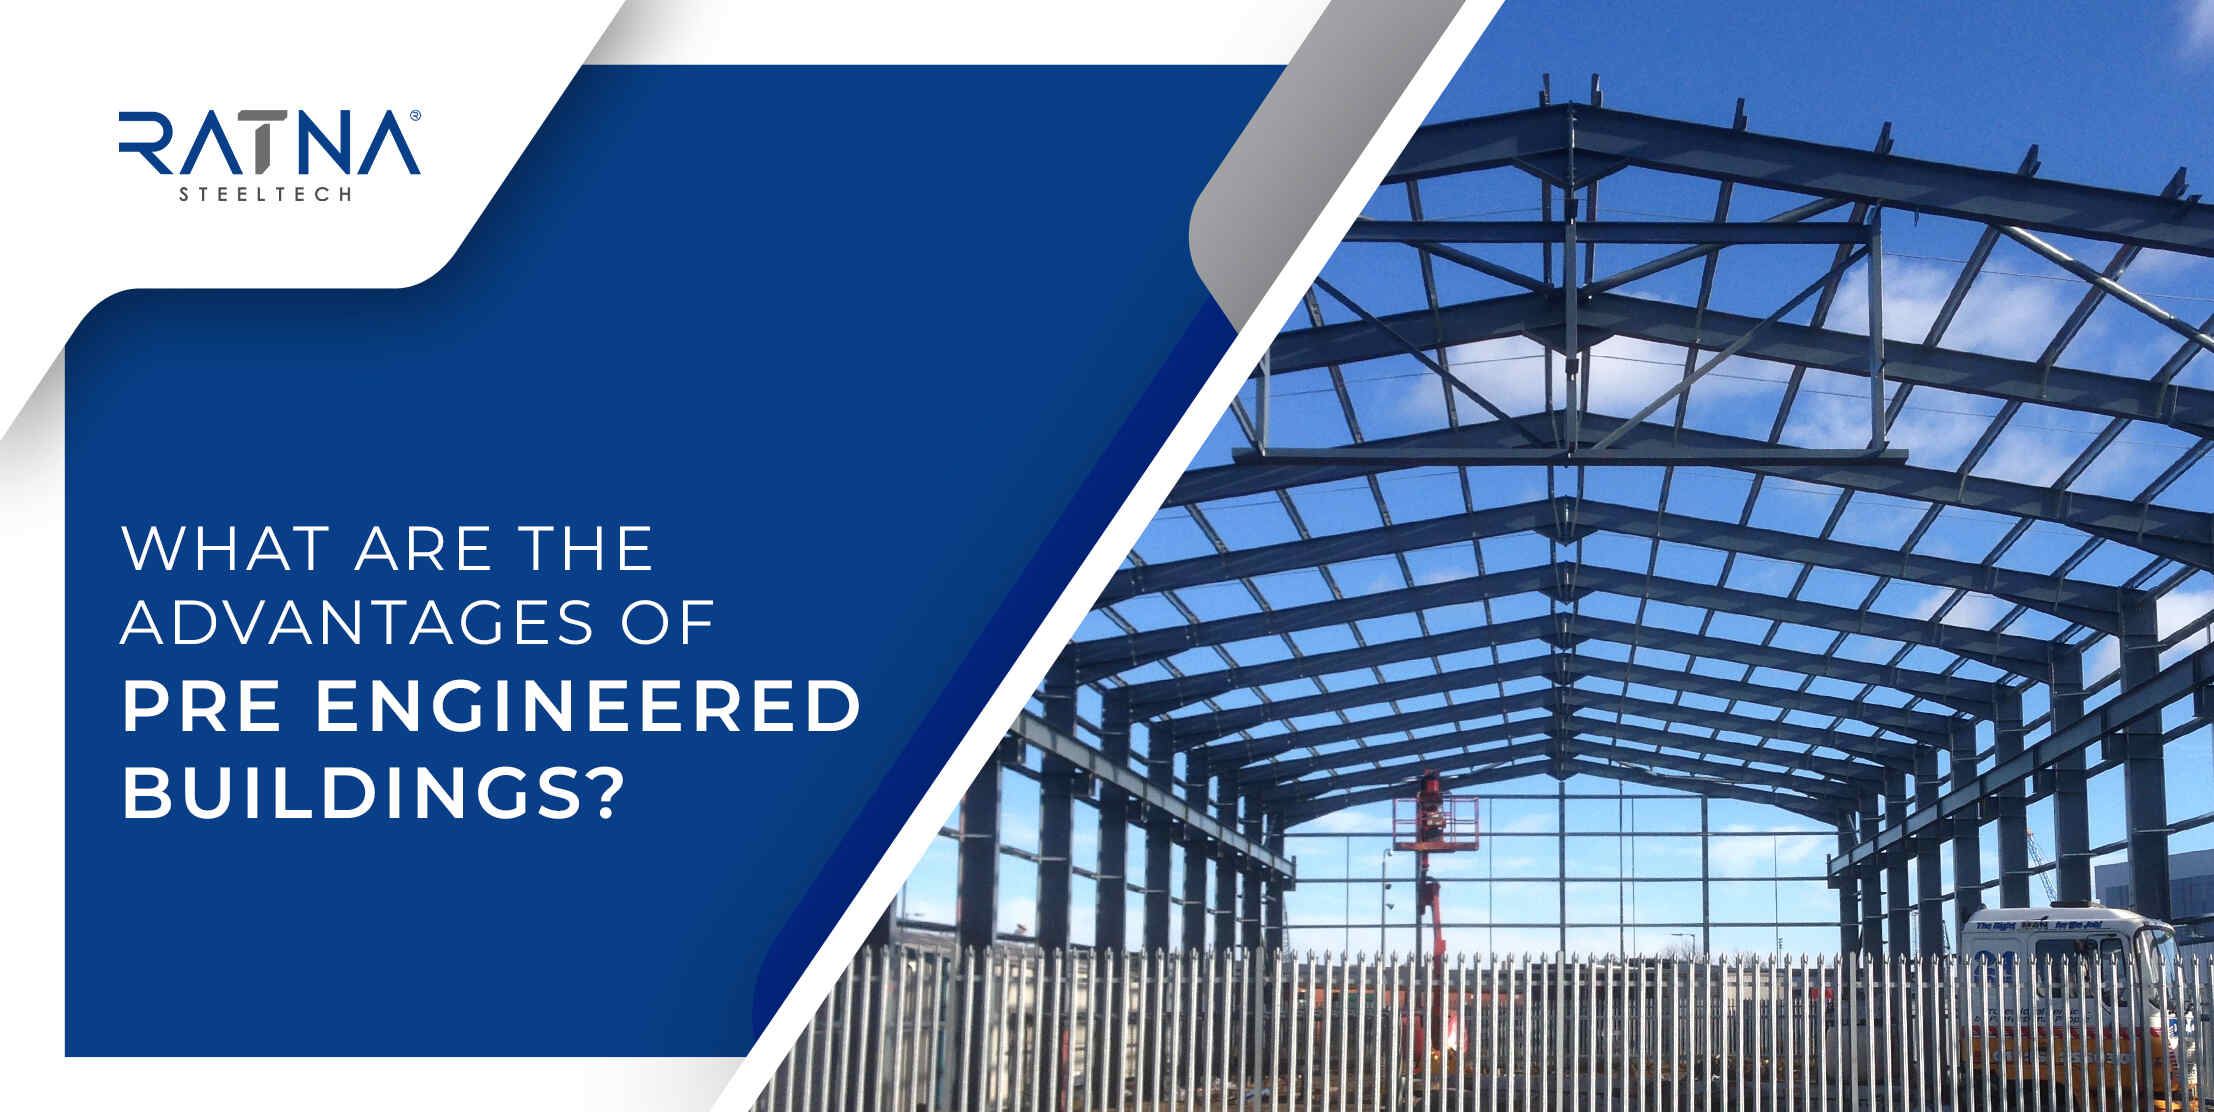 What are the Advantages of Pre-engineered Buildings?